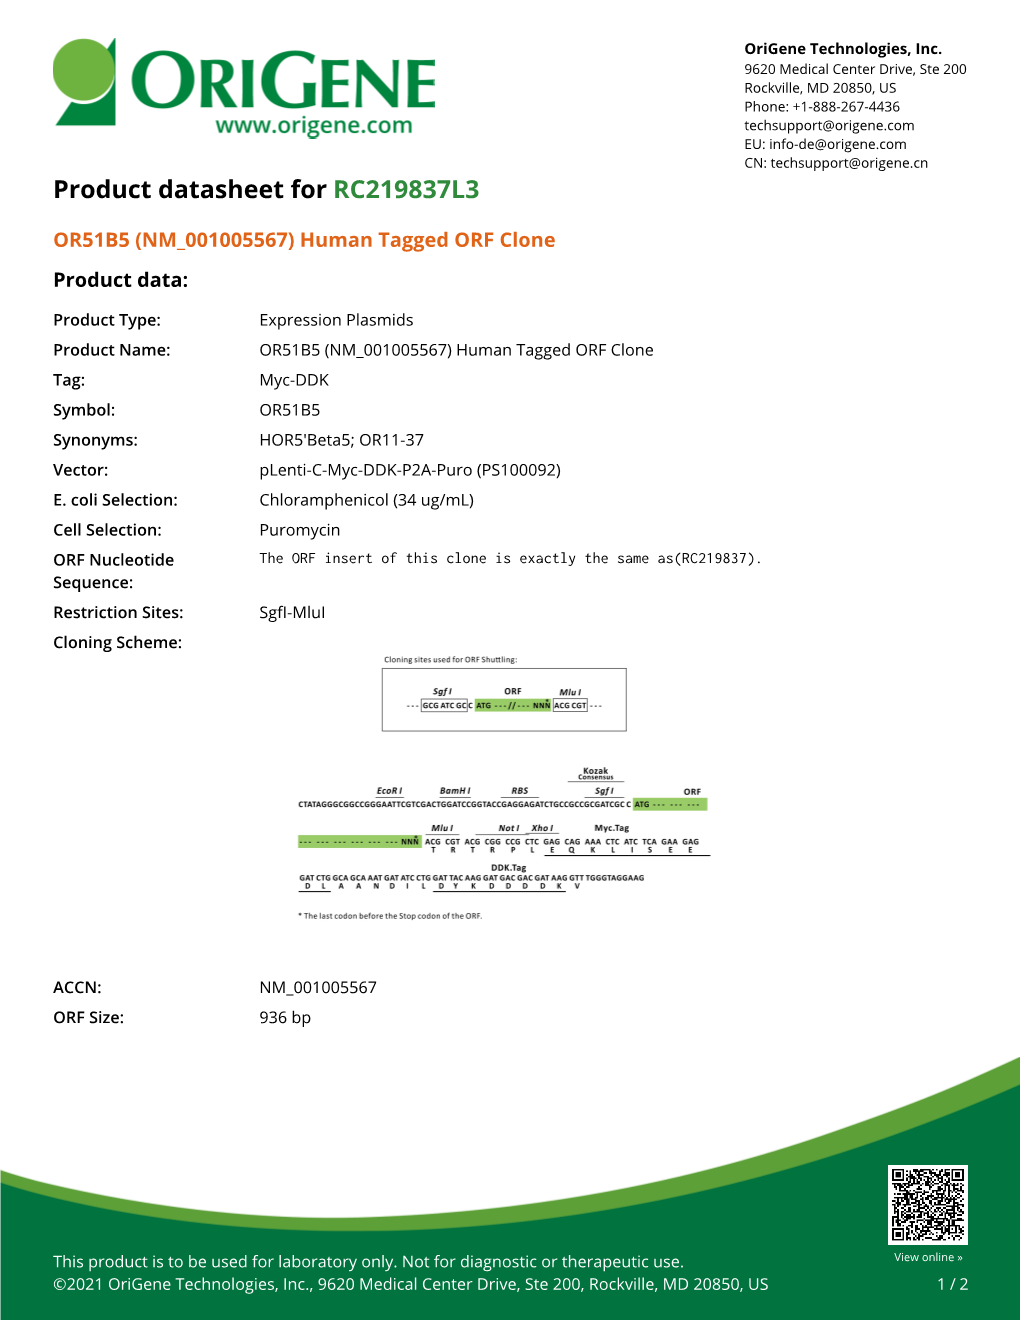 OR51B5 (NM 001005567) Human Tagged ORF Clone Product Data